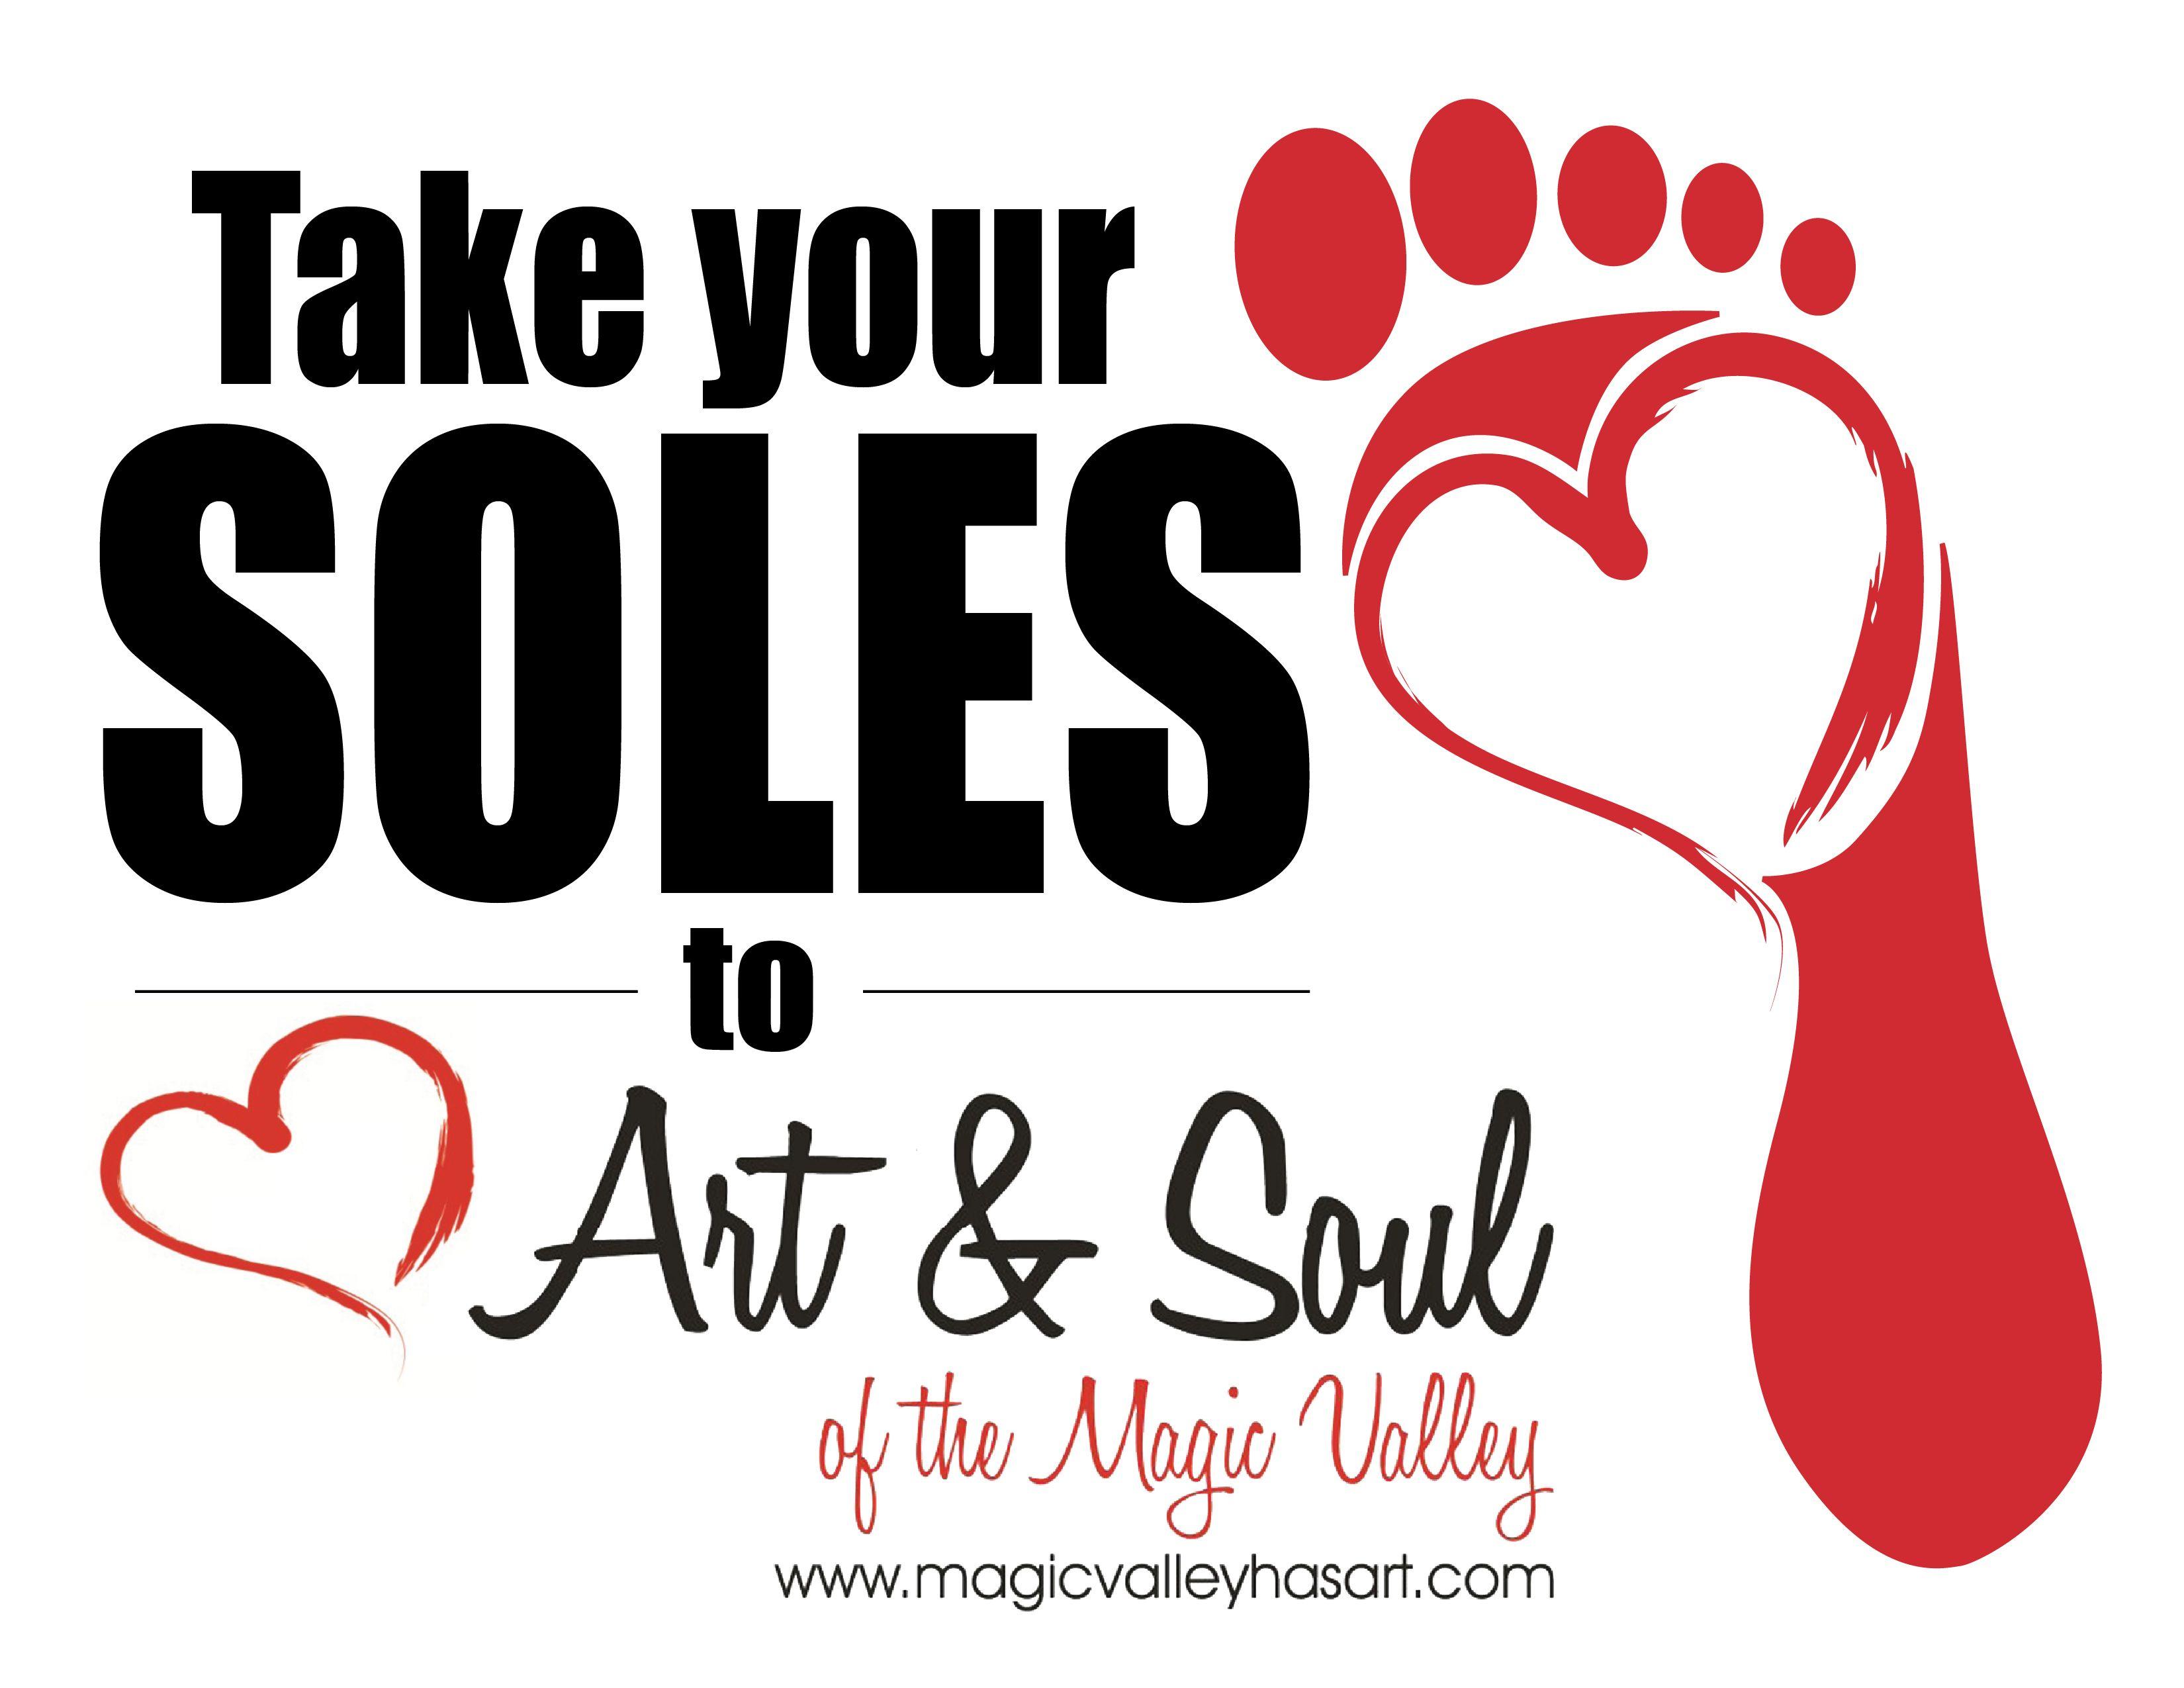 Red Sole Logo - A&S Take Your Sole Logo Tagline « magicvalleyartscouncil.org